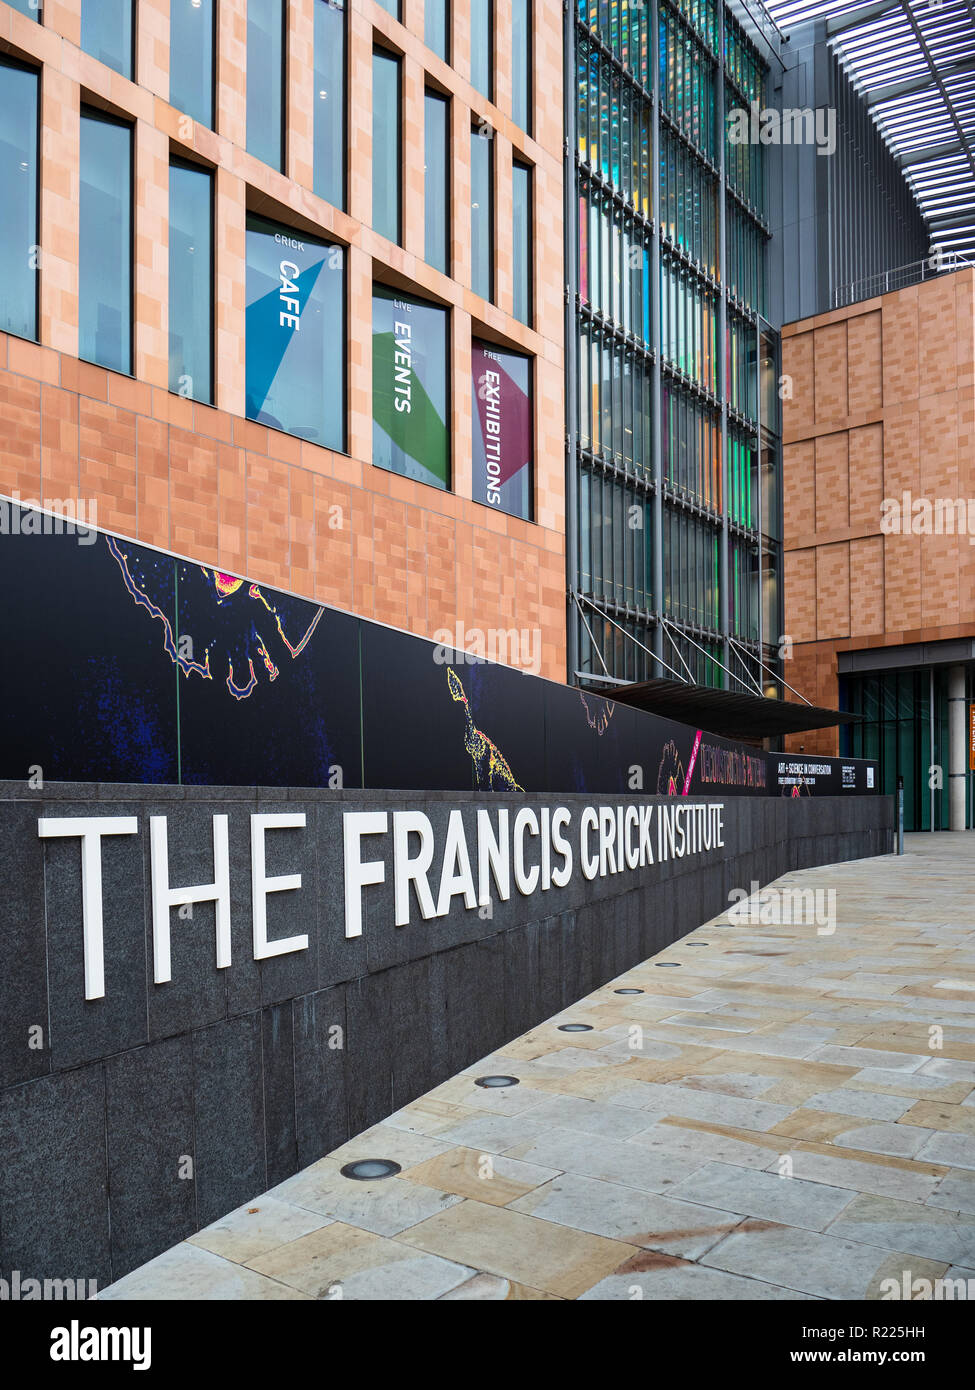 The Crick - Francis Crick Institute London  - a new biomedical research institute opened in August 2016.  Architects: HOK and PLP Stock Photo